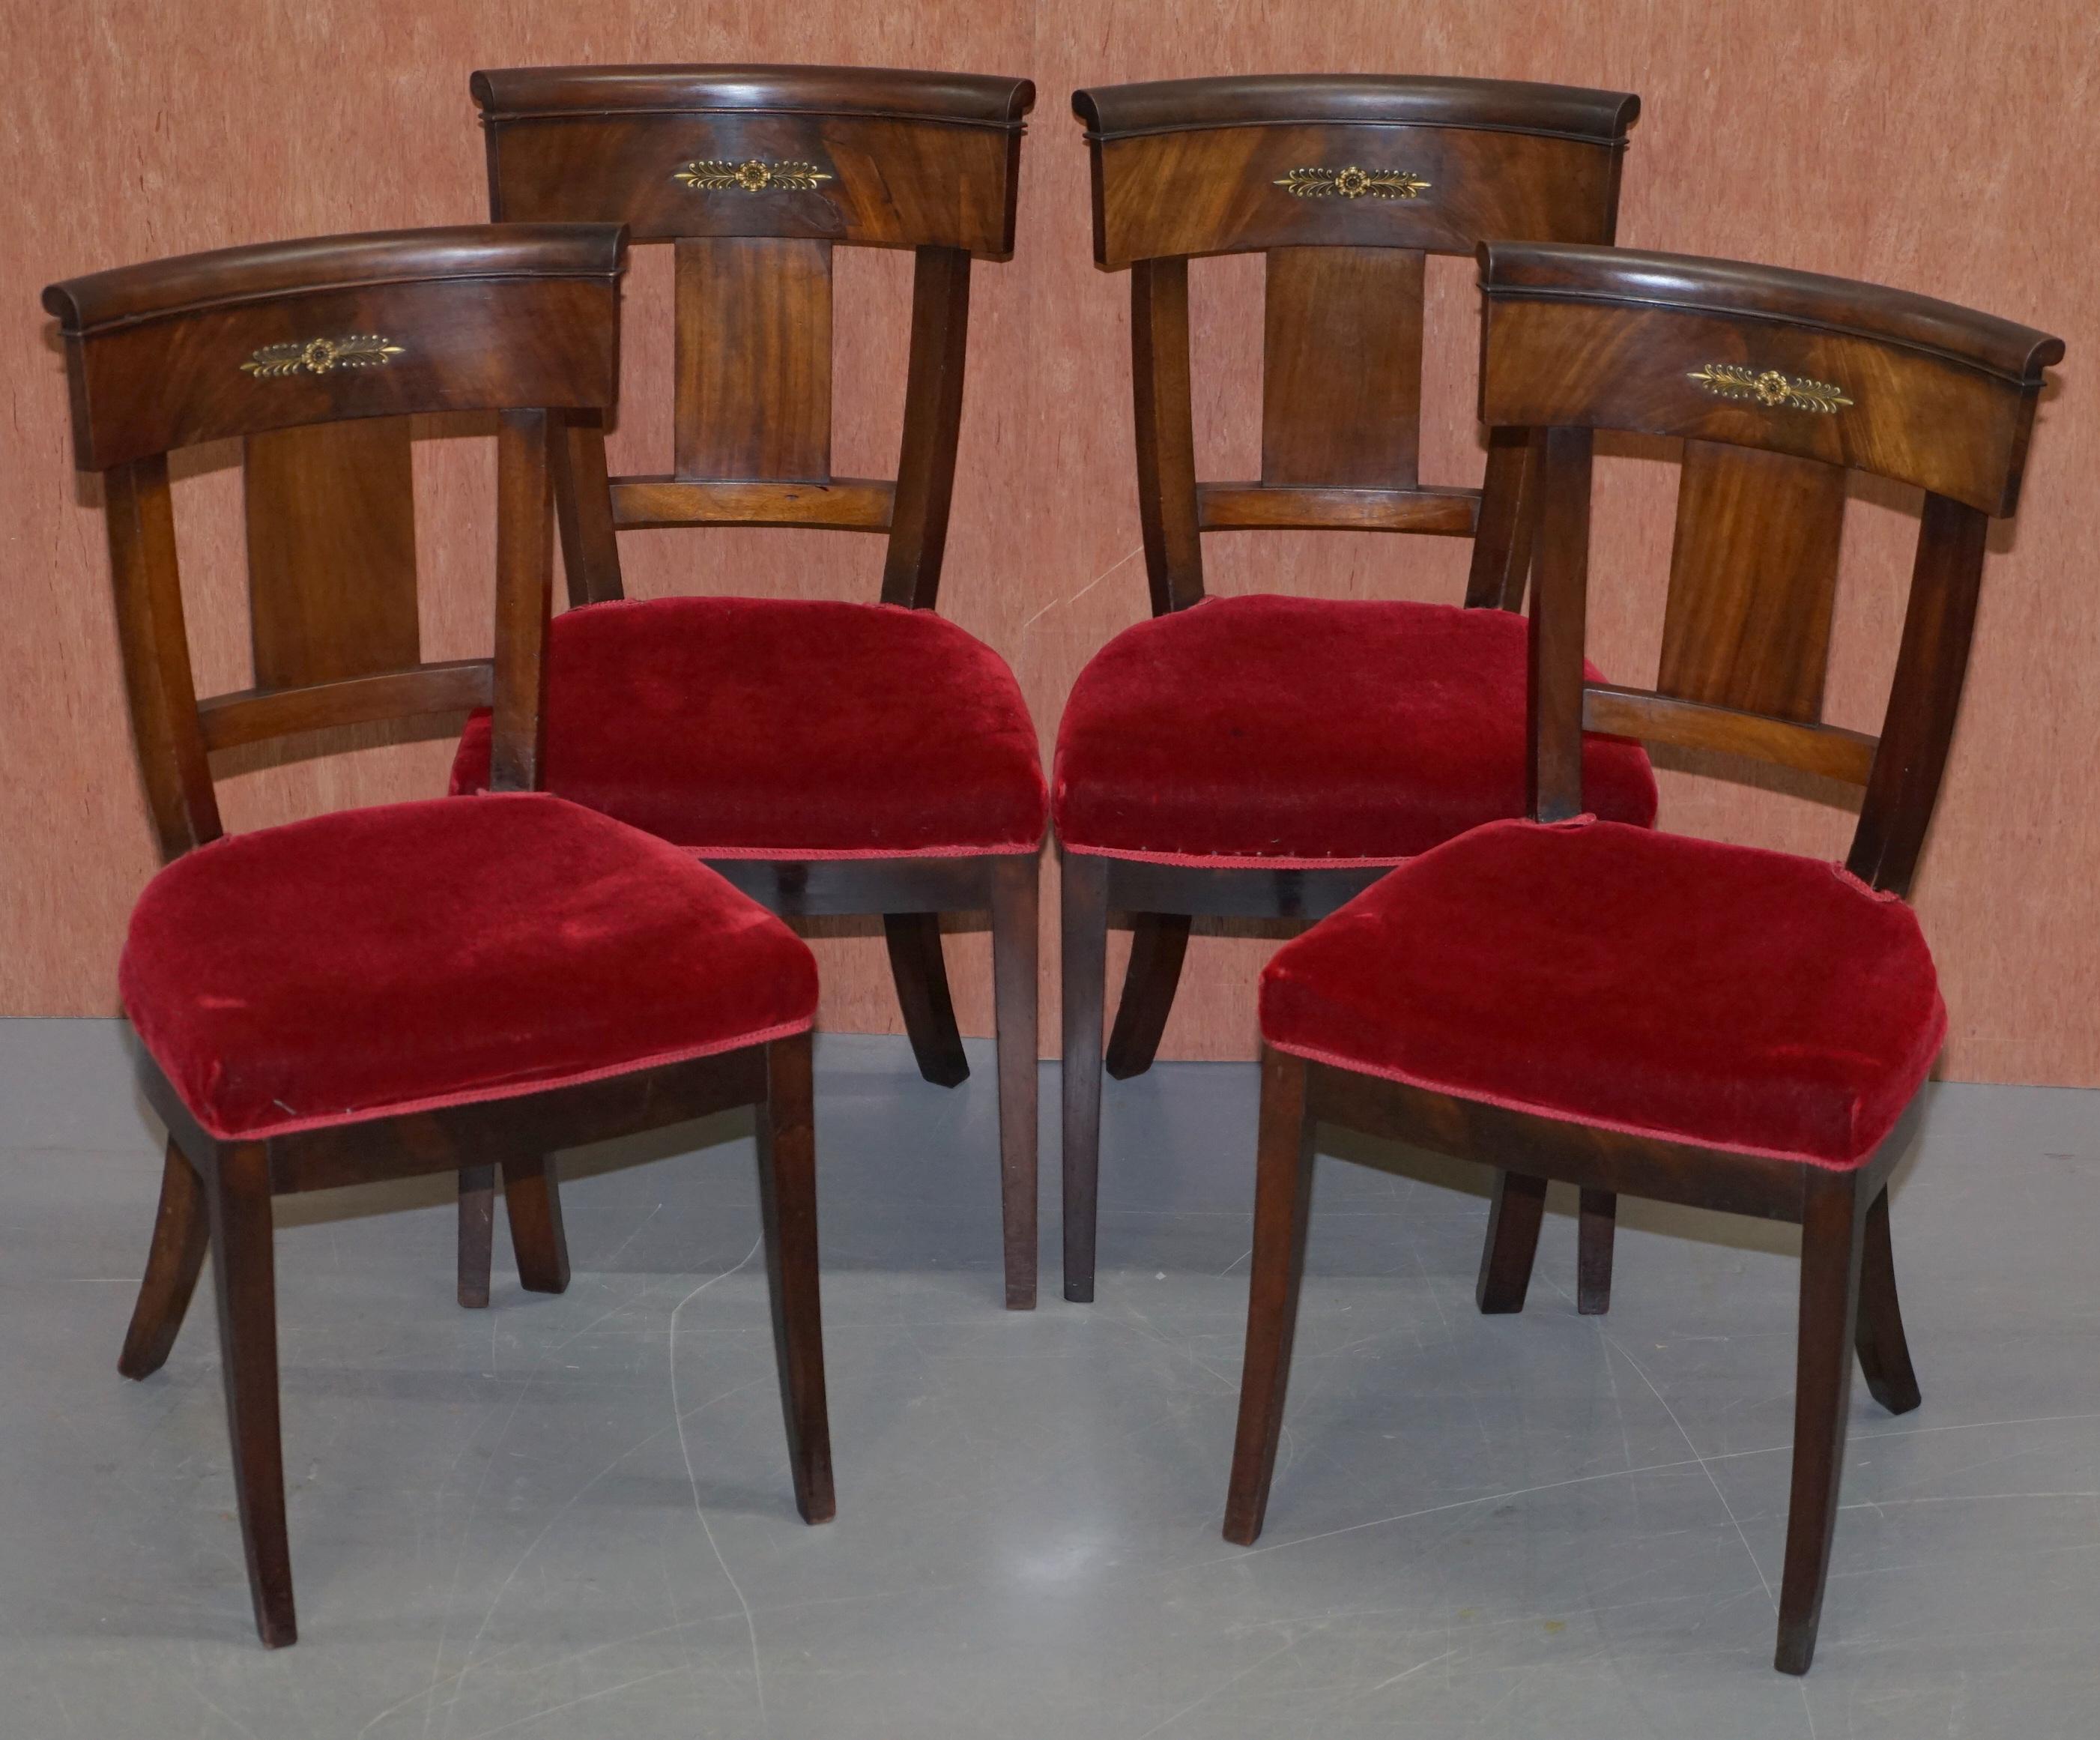 We are delighted to offer for sale this lovely suite of six original Napoleon III French Empire Revival mahogany and bronze mounted dining chairs

A good original suite, you have four standard chairs and then an old His and Hers pair of carvers